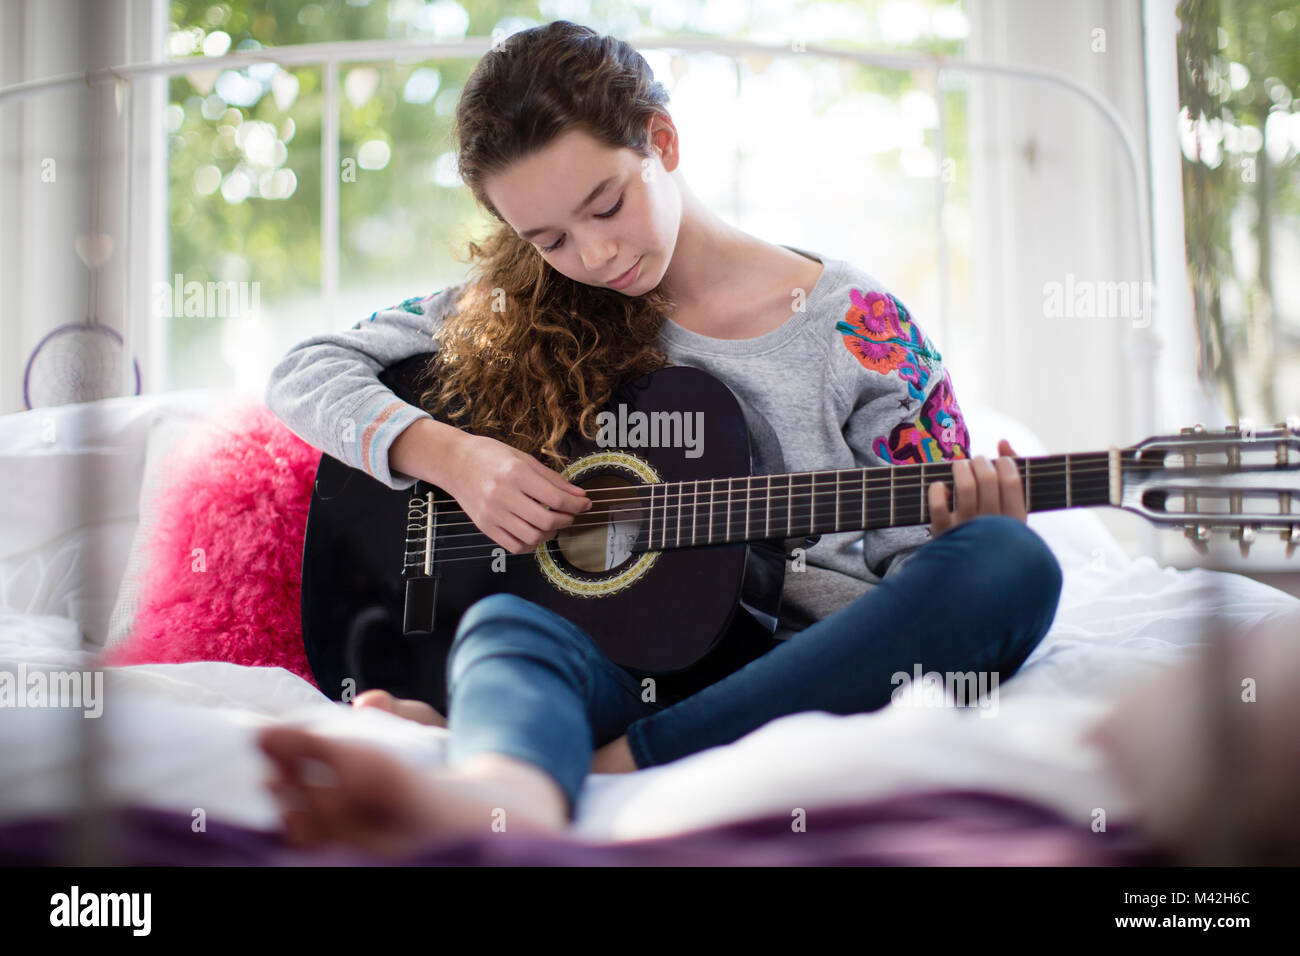 Teenager playing acoustic guitar Stock Photo